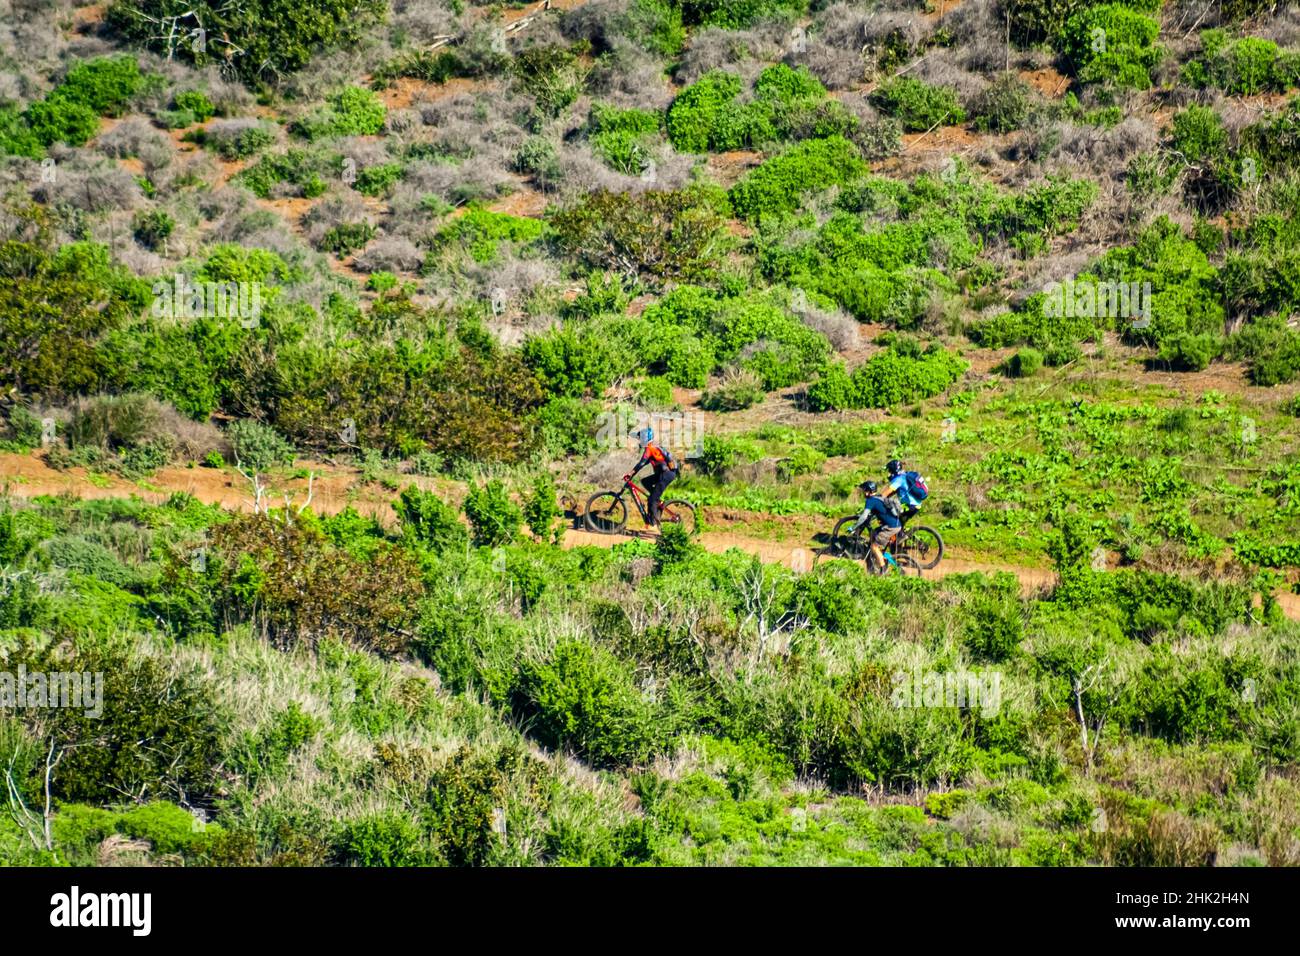 Cyclists riding up a hill surrounded by greenery Stock Photo